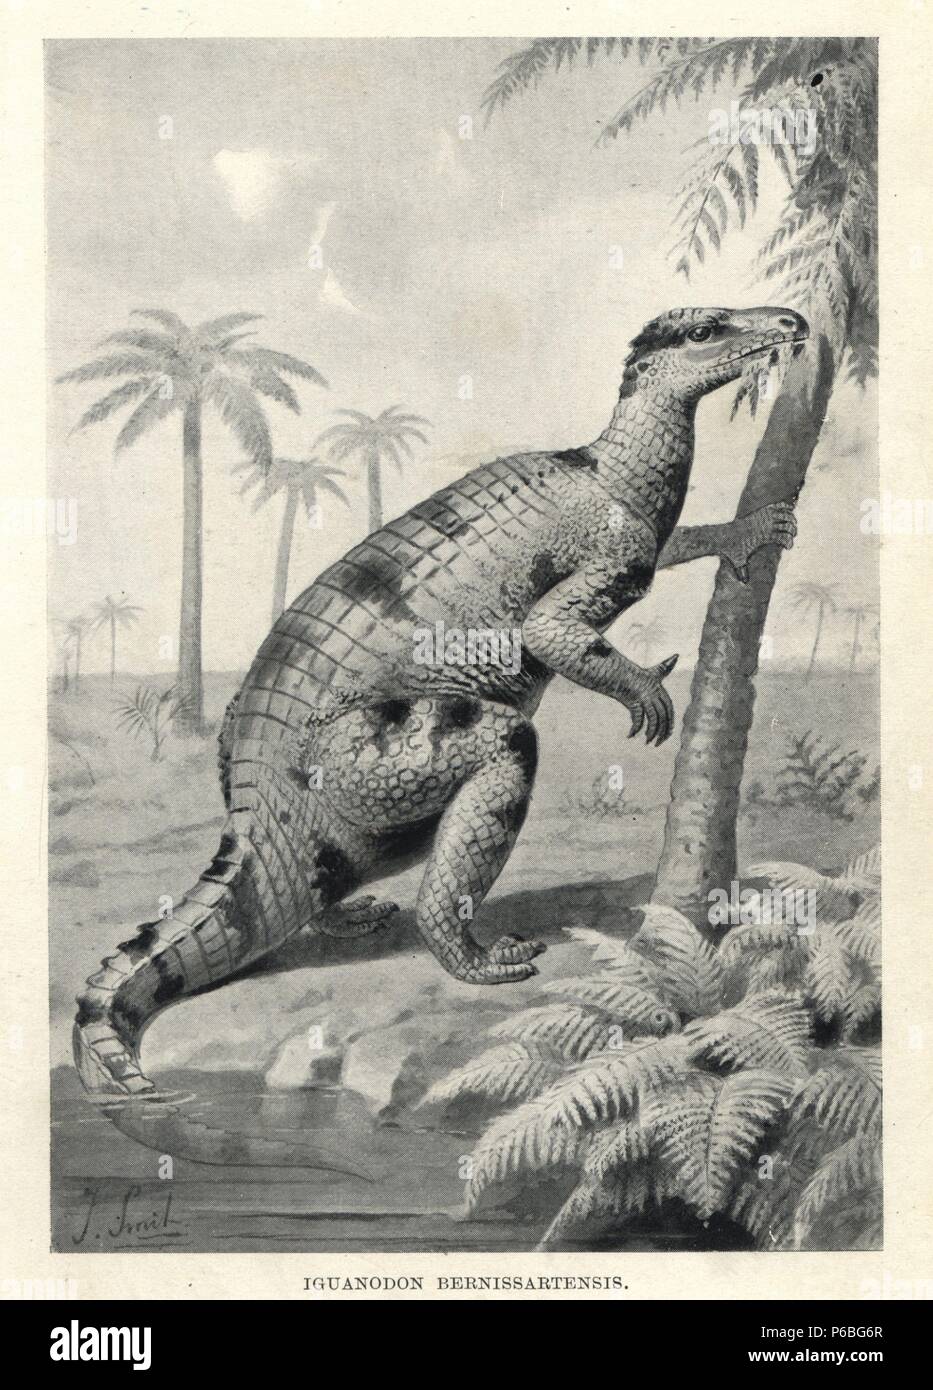 Iguanodon bernissartensis. Illustration by J. Smit from H. N. Hutchinson's 'Extinct Monsters and Creatures of Other Days,' Chapman and Hall, London, 1894. Stock Photo